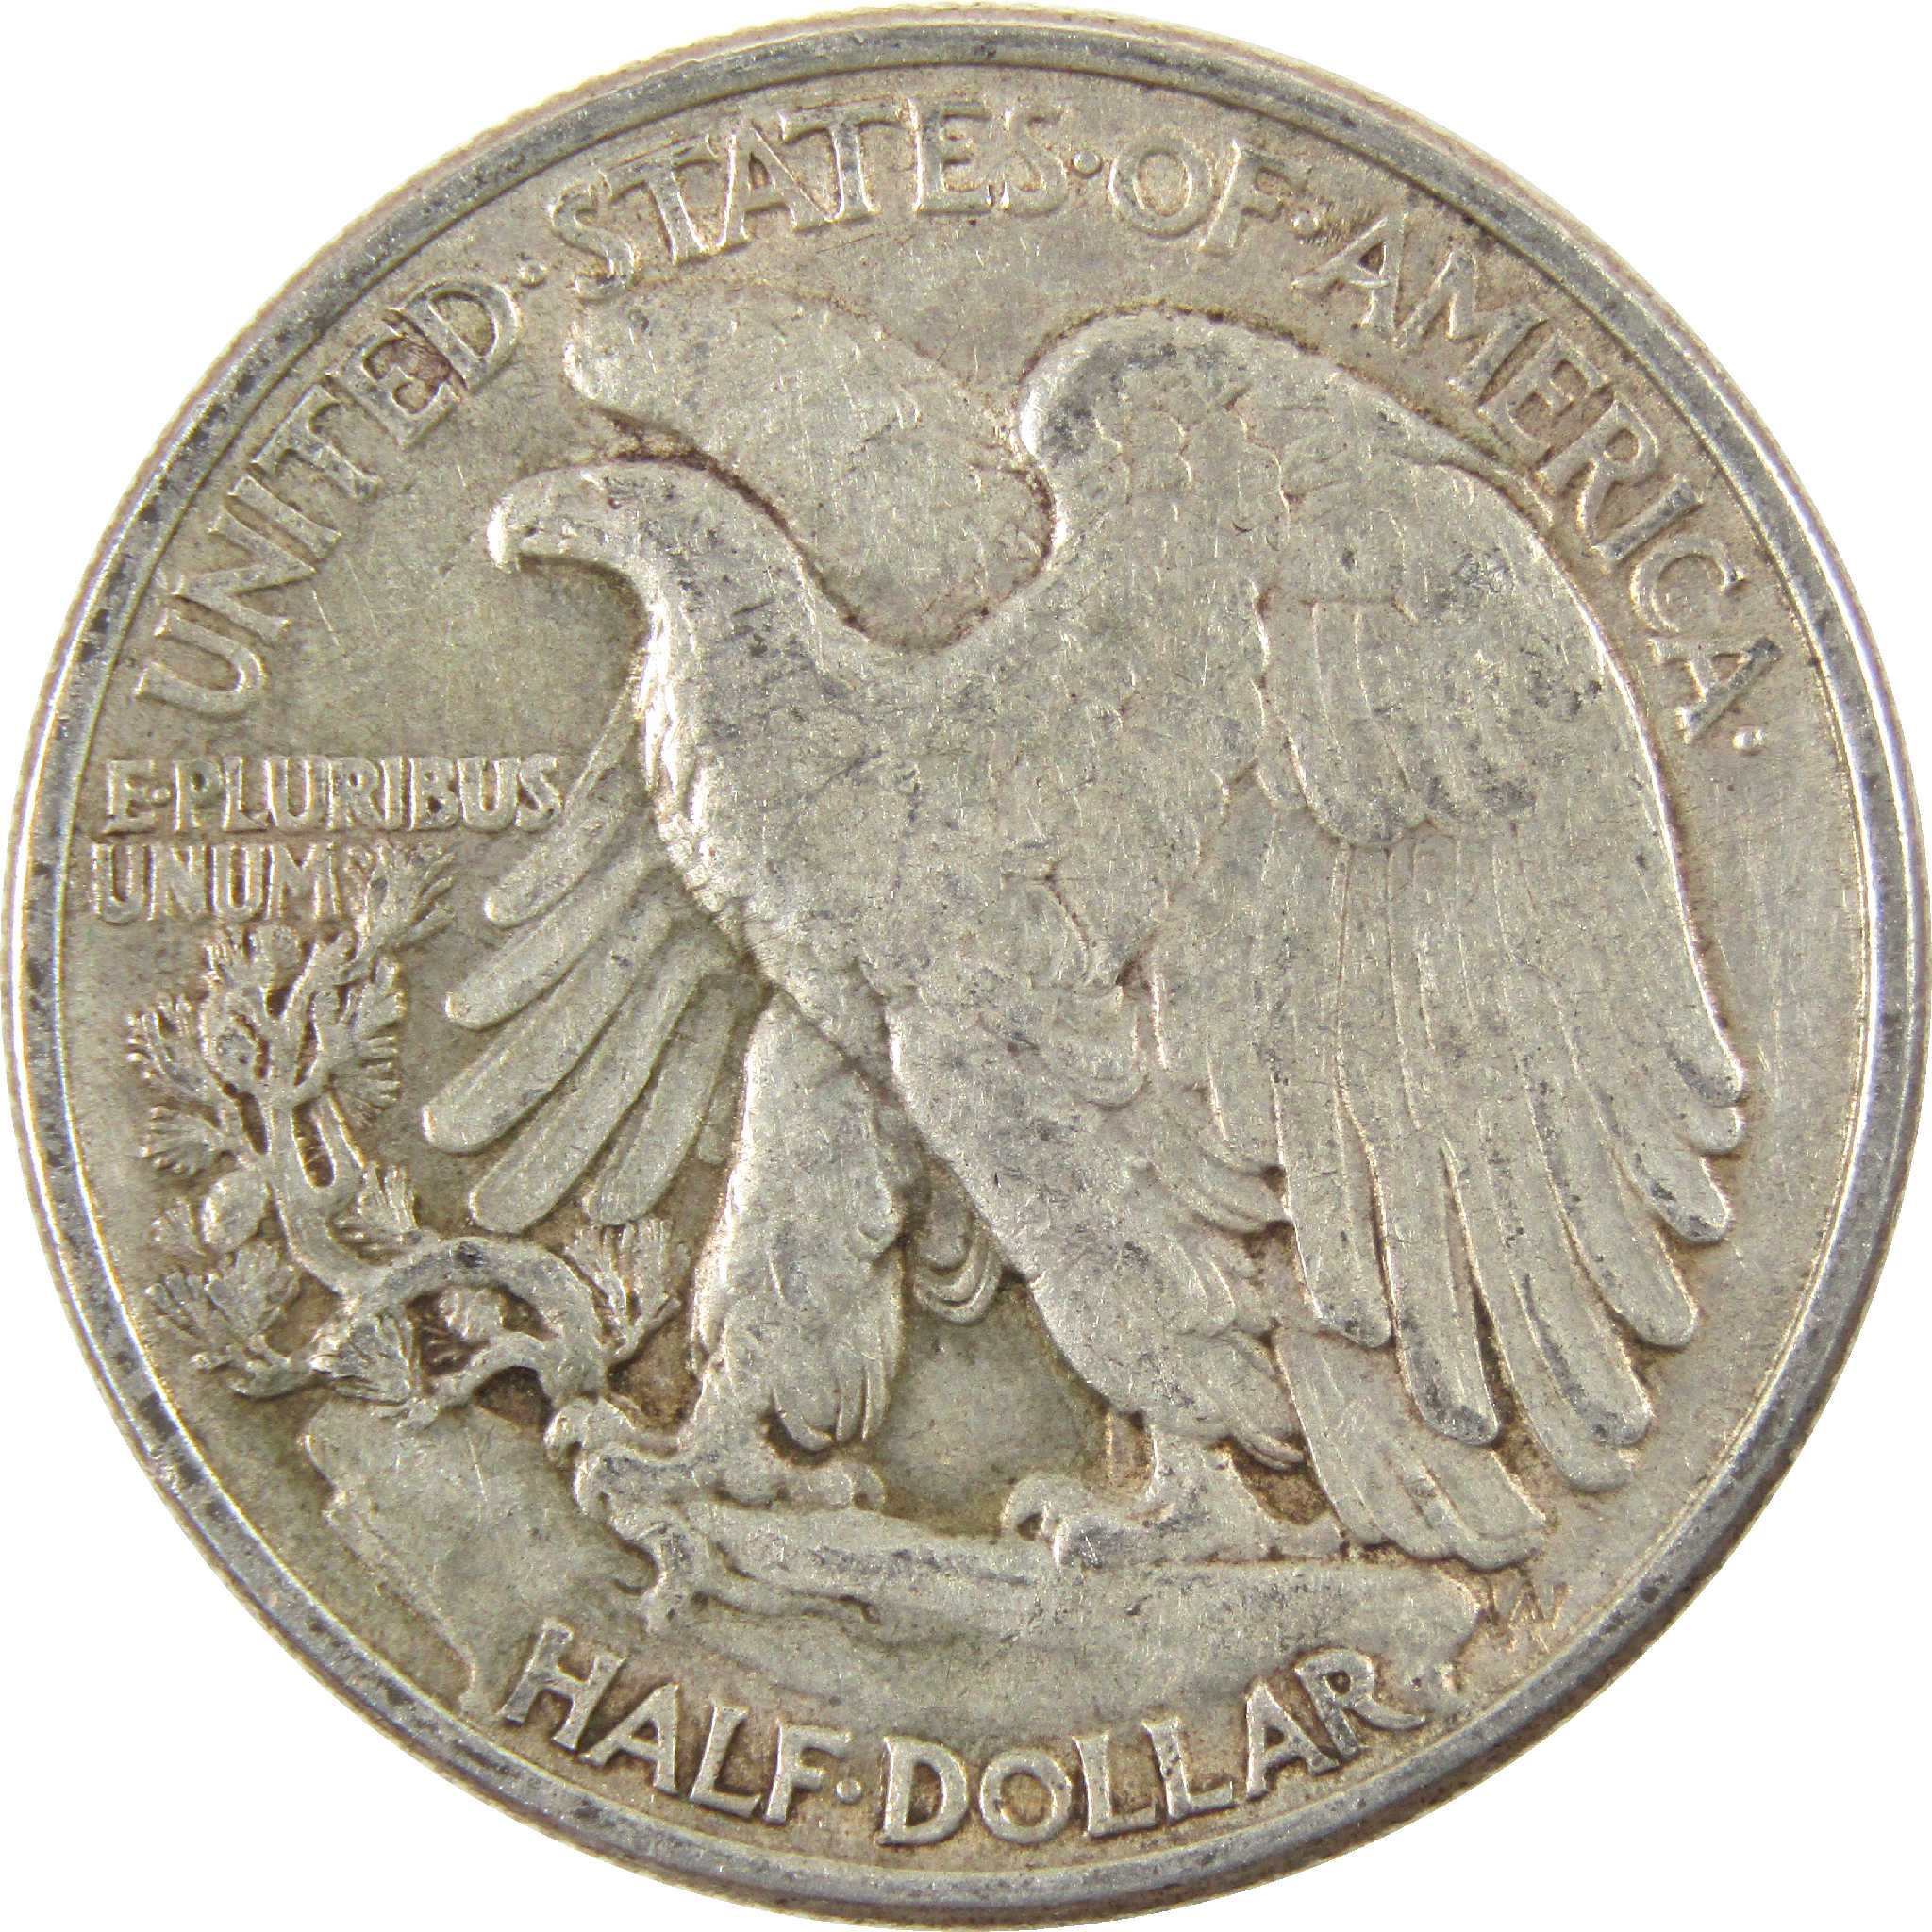 1947 Liberty Walking Half Dollar XF EF Extremely Fine Silver 50c Coin